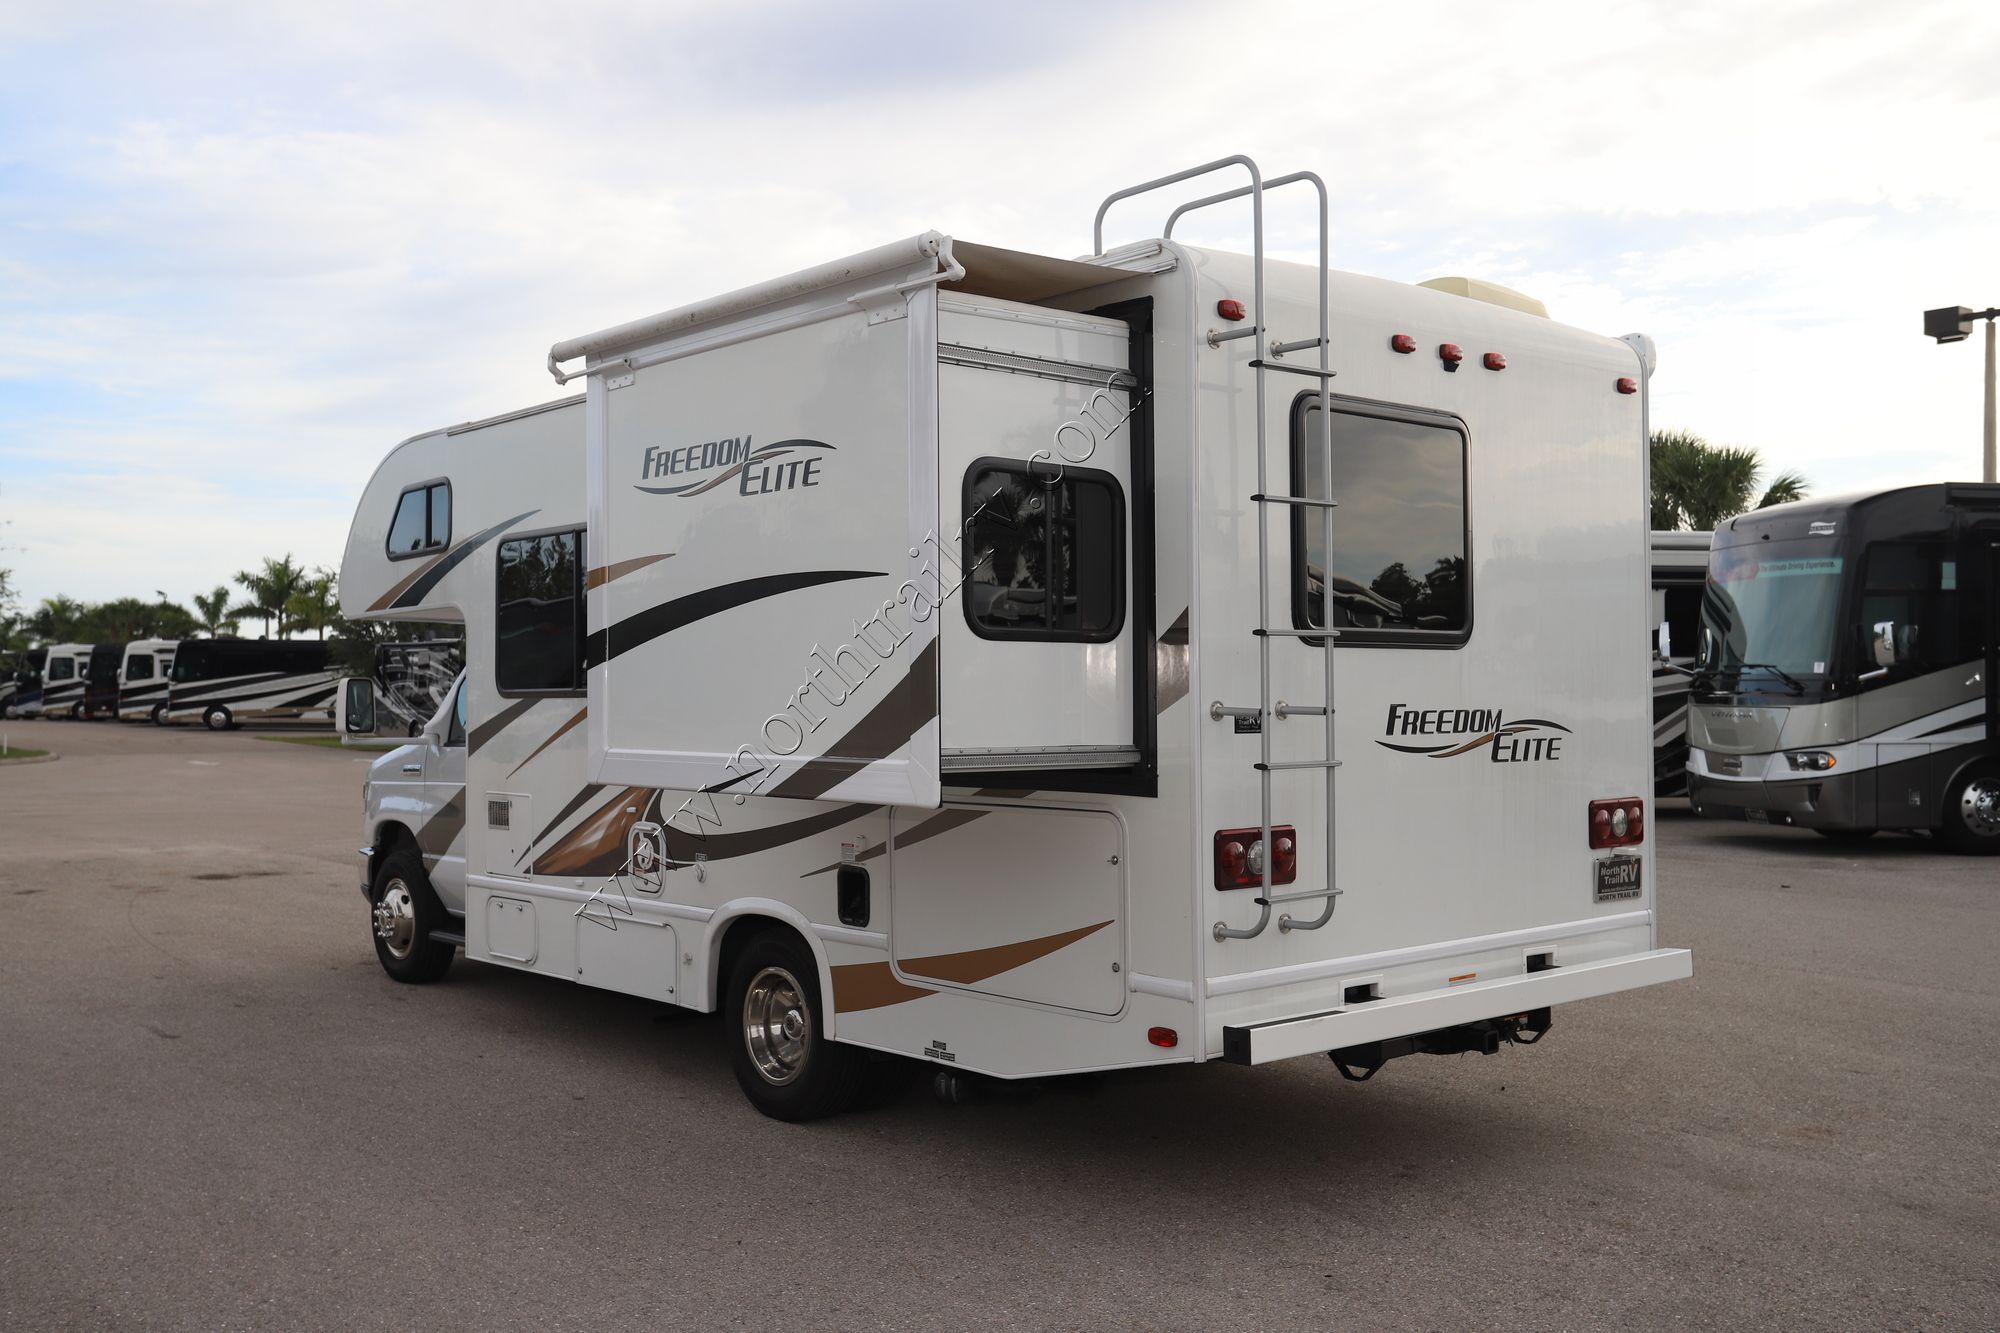 Used 2017 Thor Freedom Elite 22FE Class C  For Sale